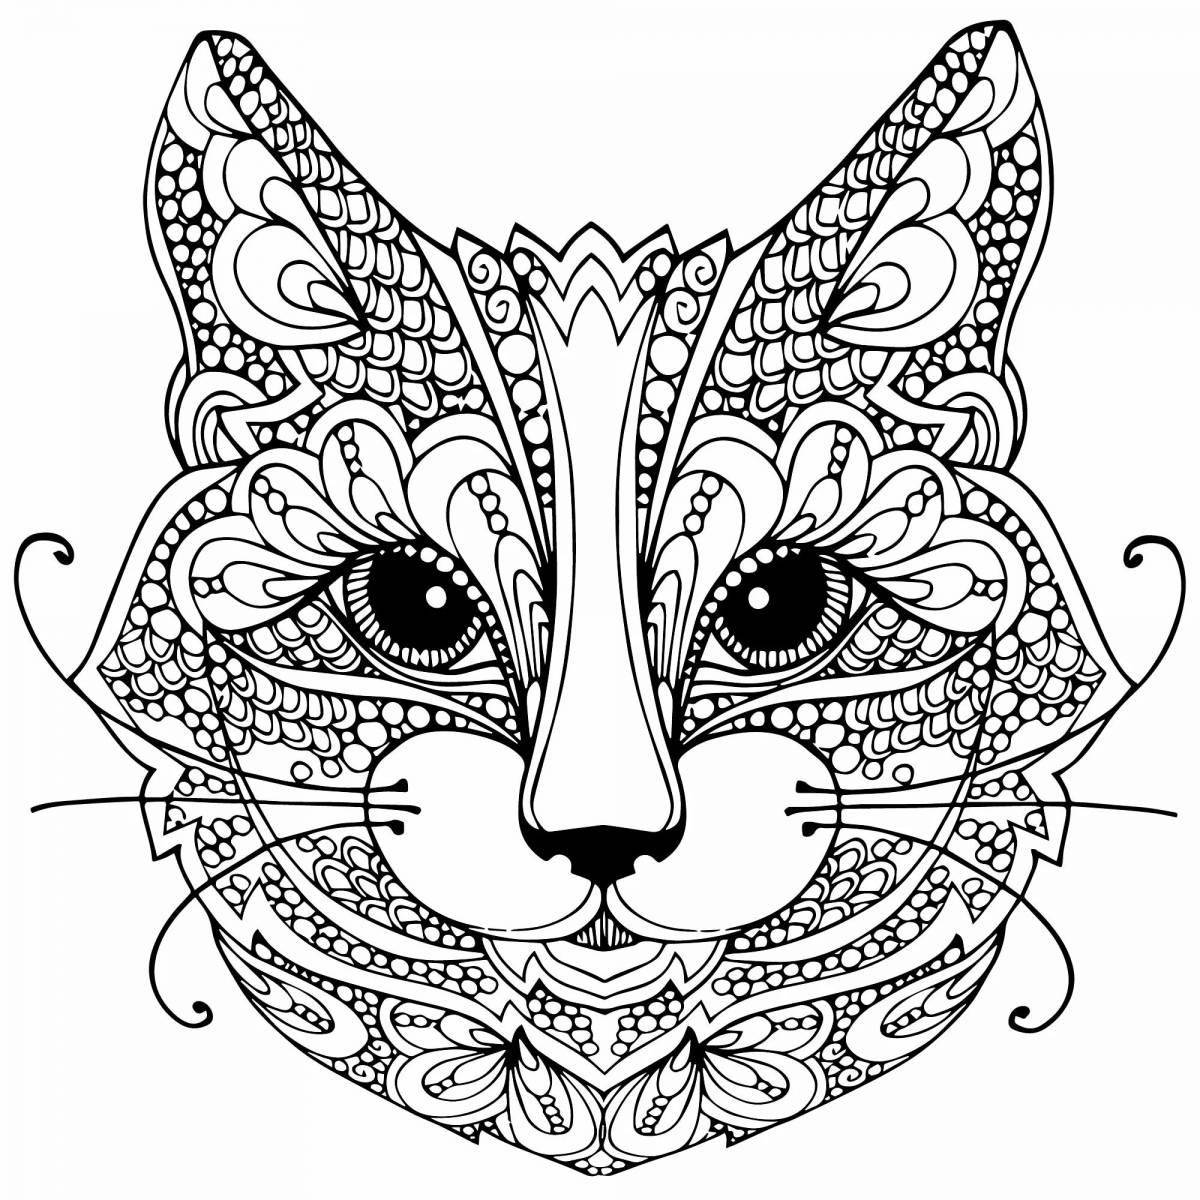 Playful cat coloring page art